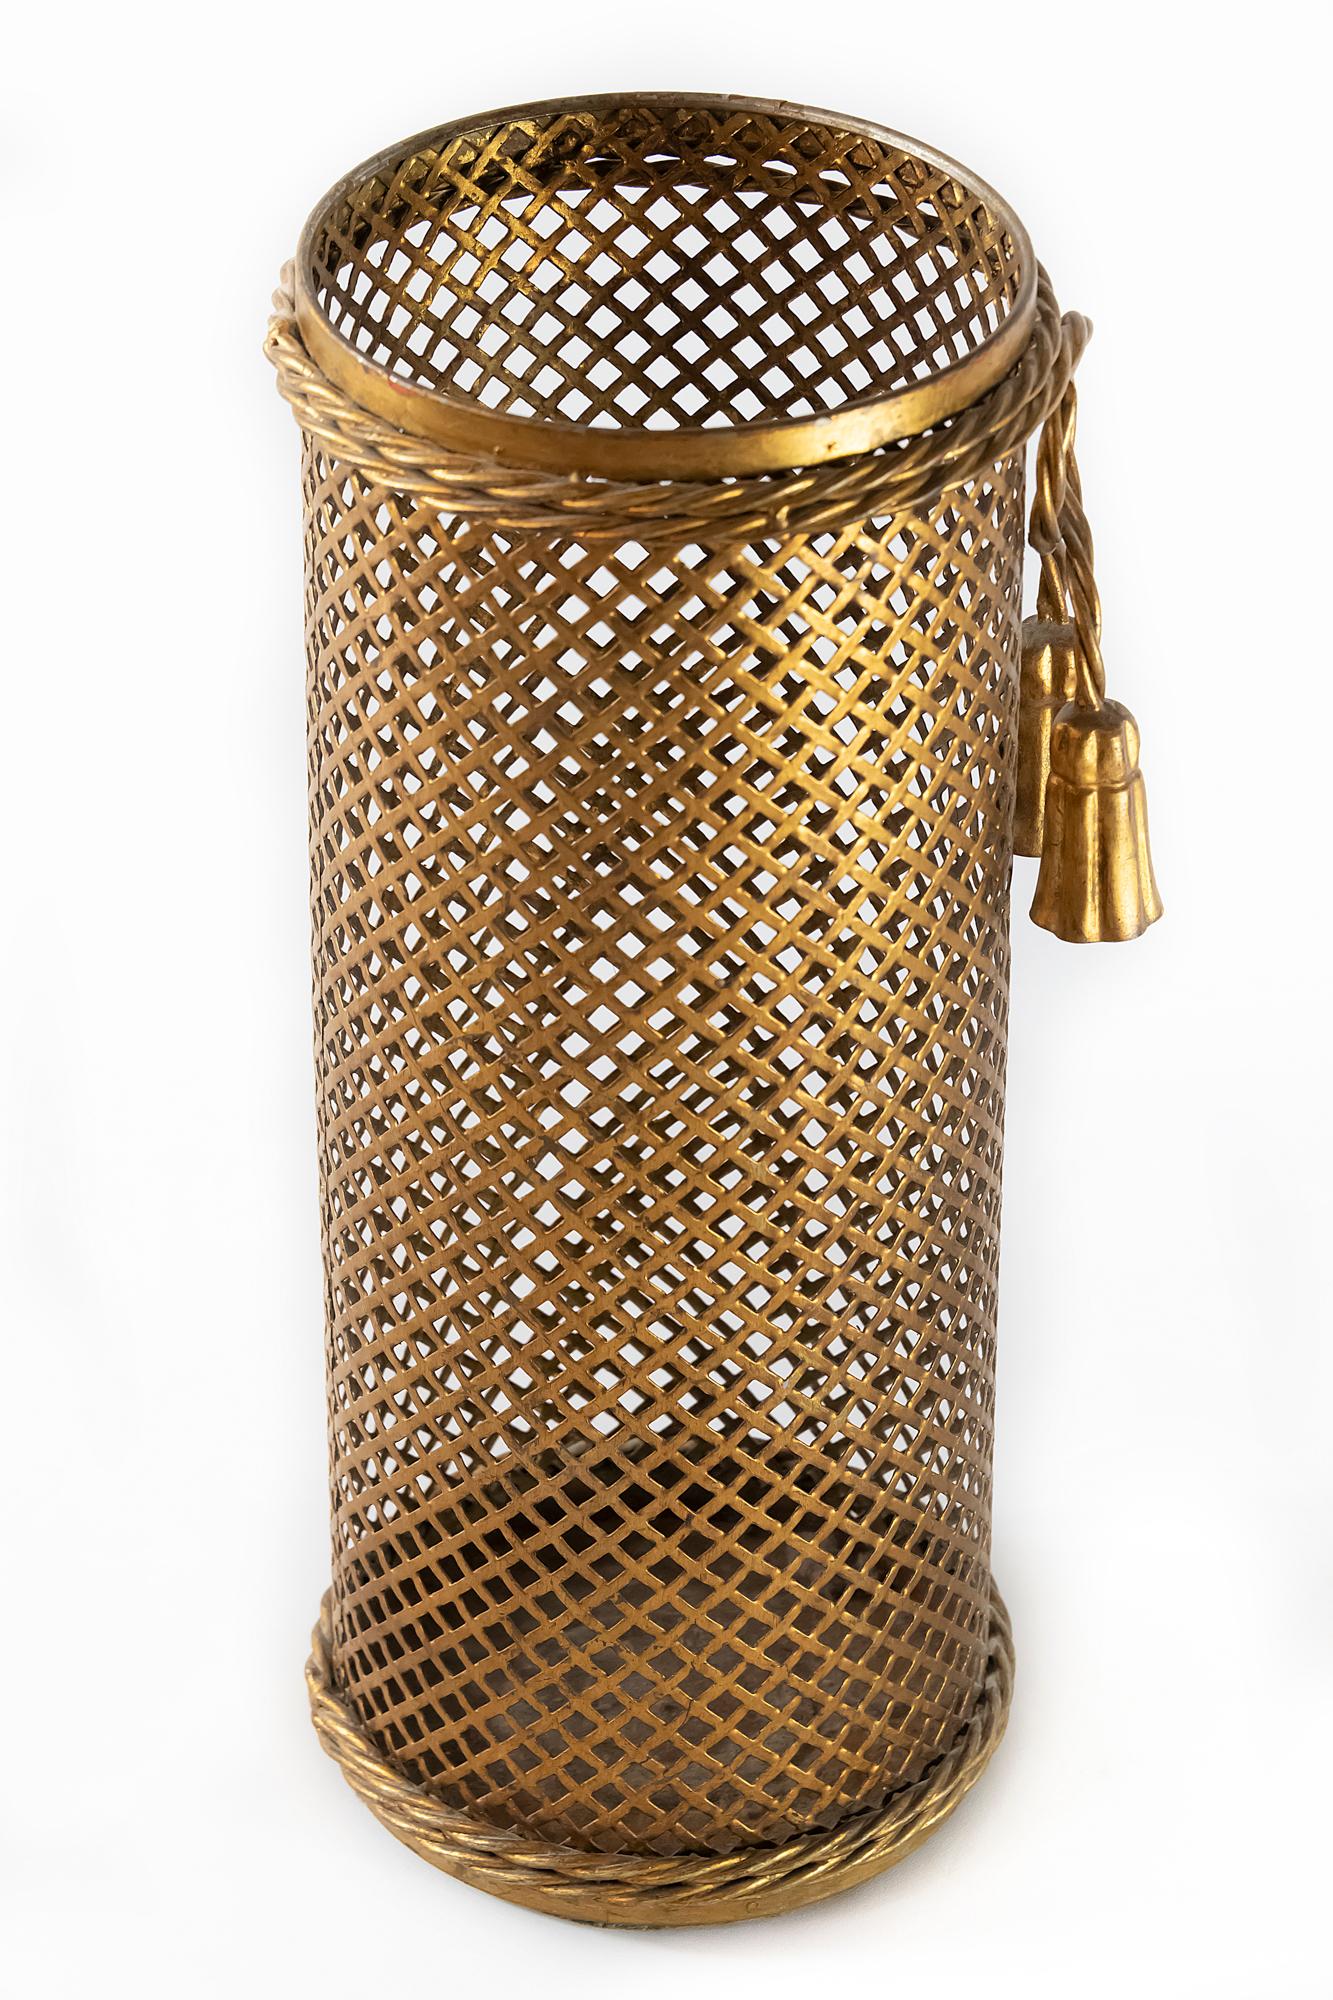 Midcentury Italian umbrella stand is made of gold patinated metal.
The body of stand is created with lattice pattern, decotated with rope decor.